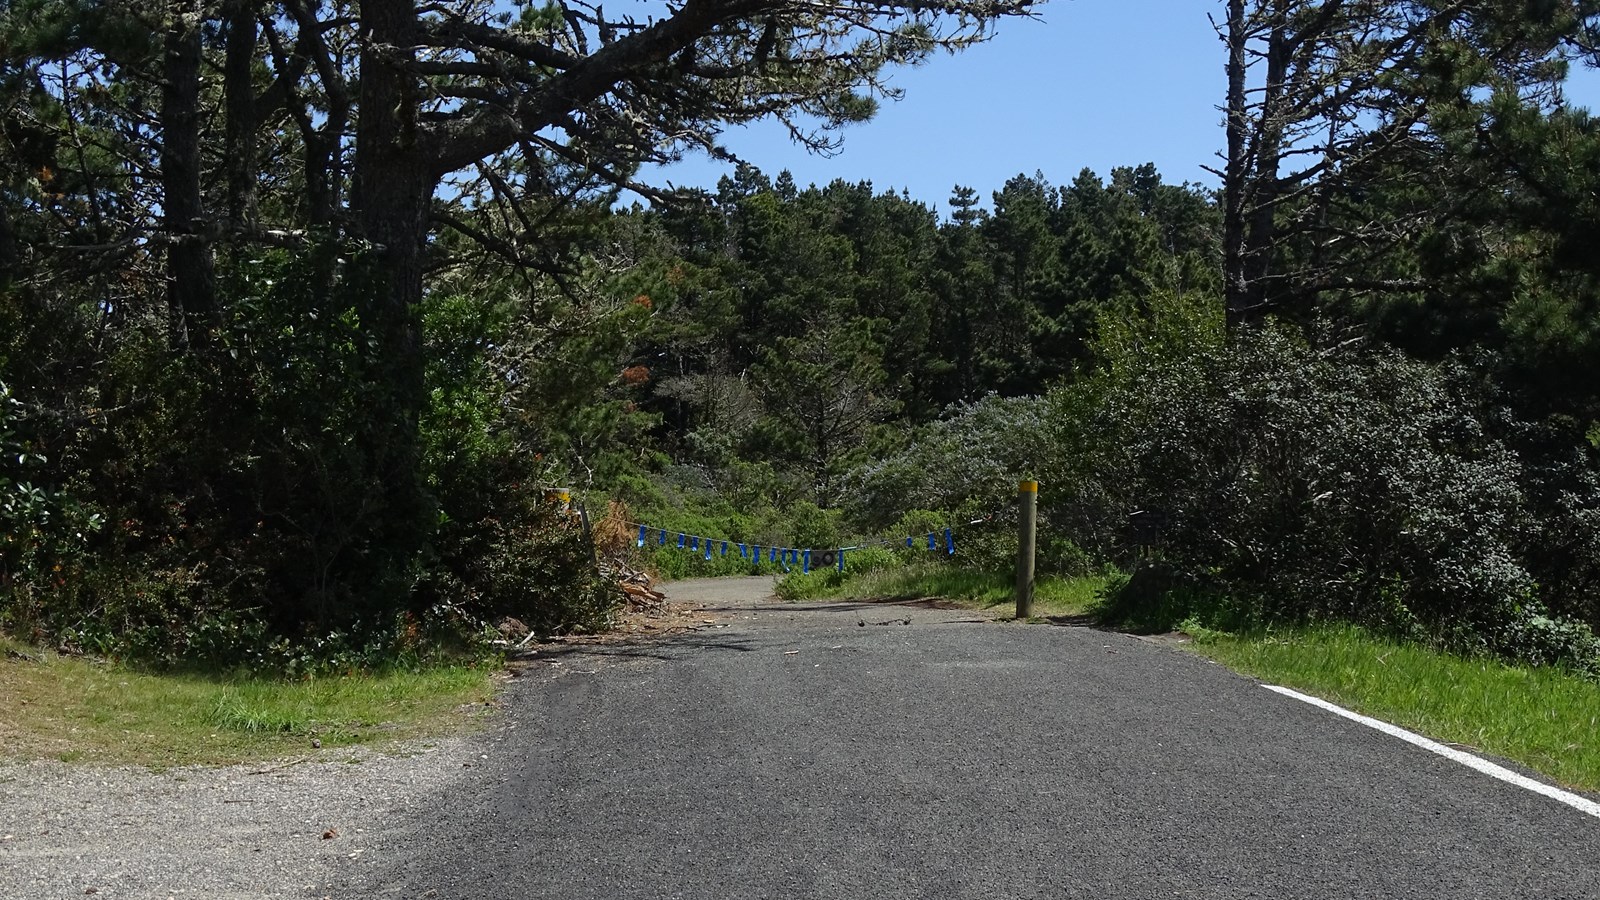 A chain gate with blue ribbons blocks an arrow asphalt road that leads past and towards trees.